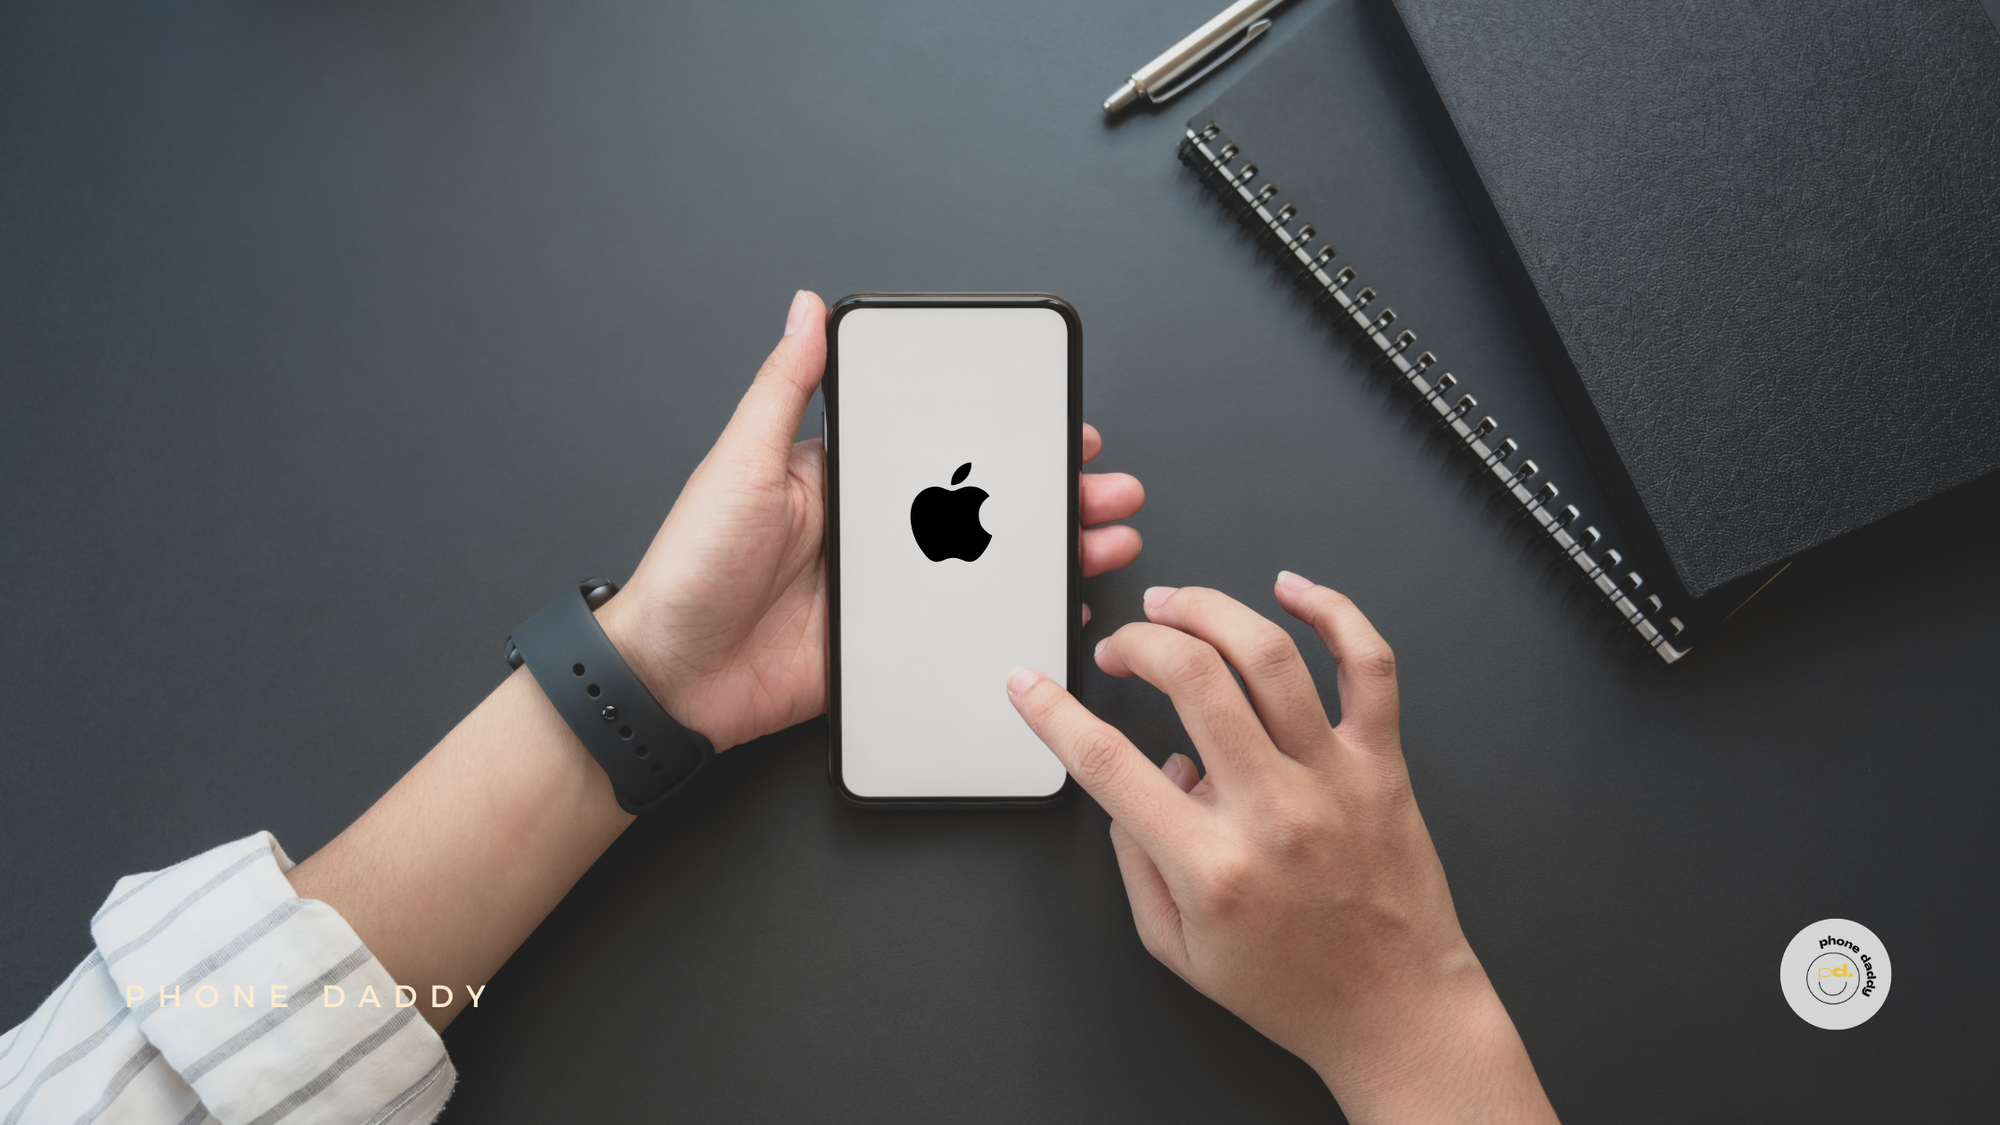 APPLE ADDED A “SECRET BUTTON” TO IOS 14 USERS